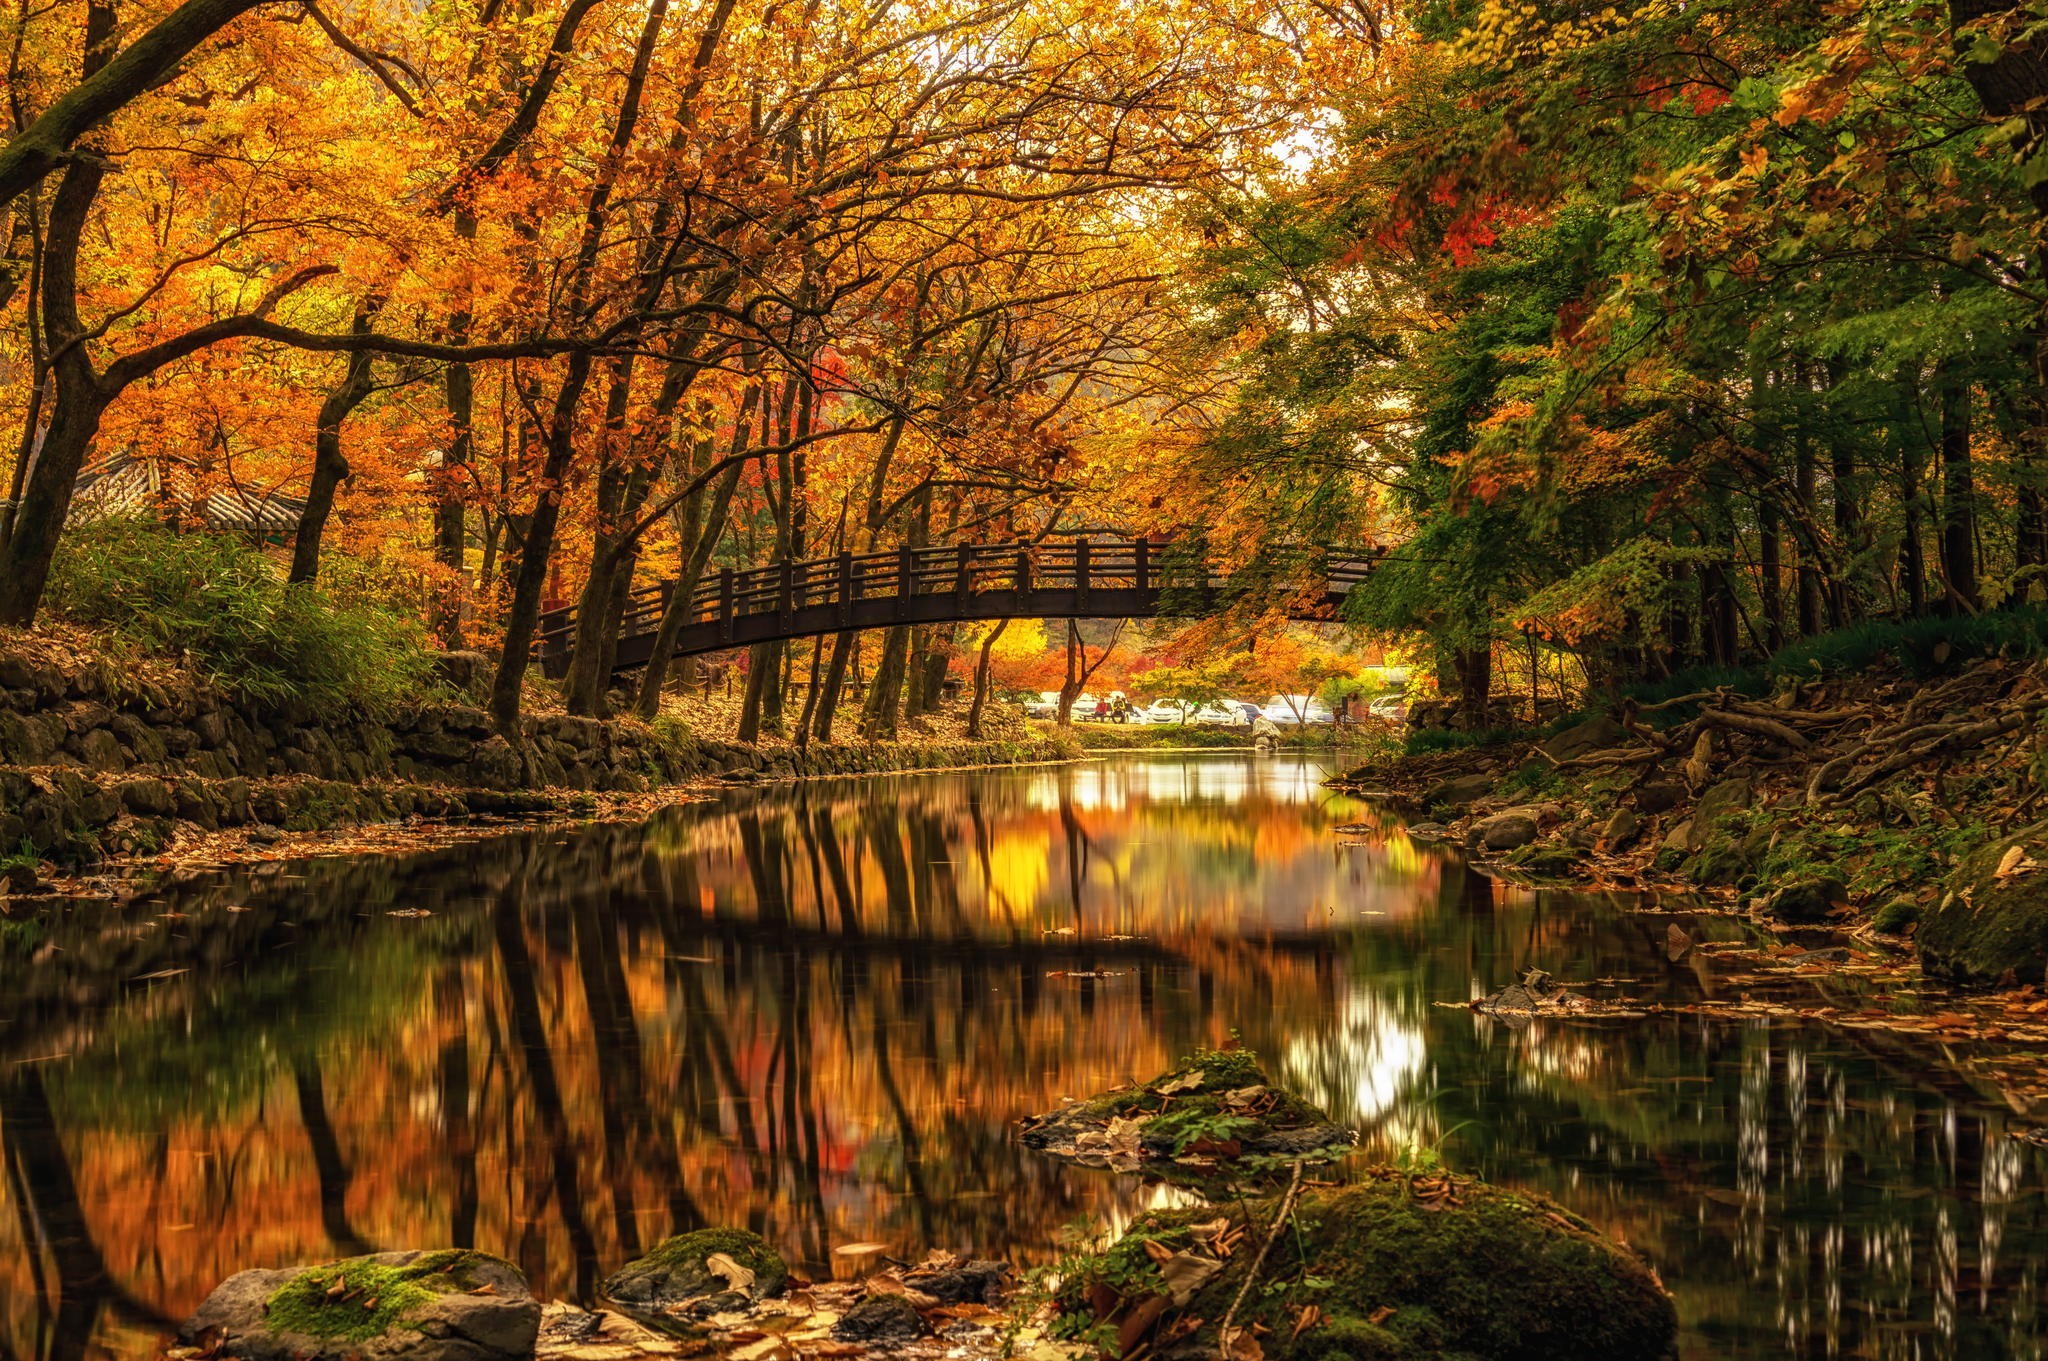 General 2048x1361 nature landscape water trees forest river bridge fall branch stones reflection